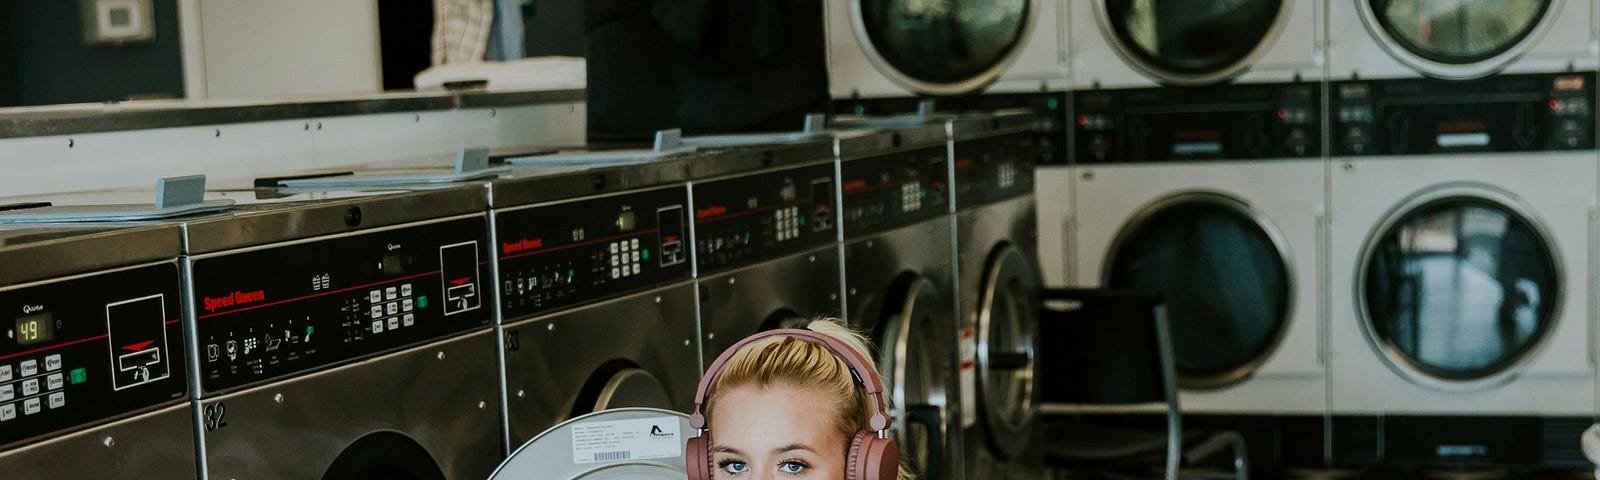 Cute young woman in a laundry mat with a clothes basket on her hip and headphones on her head.